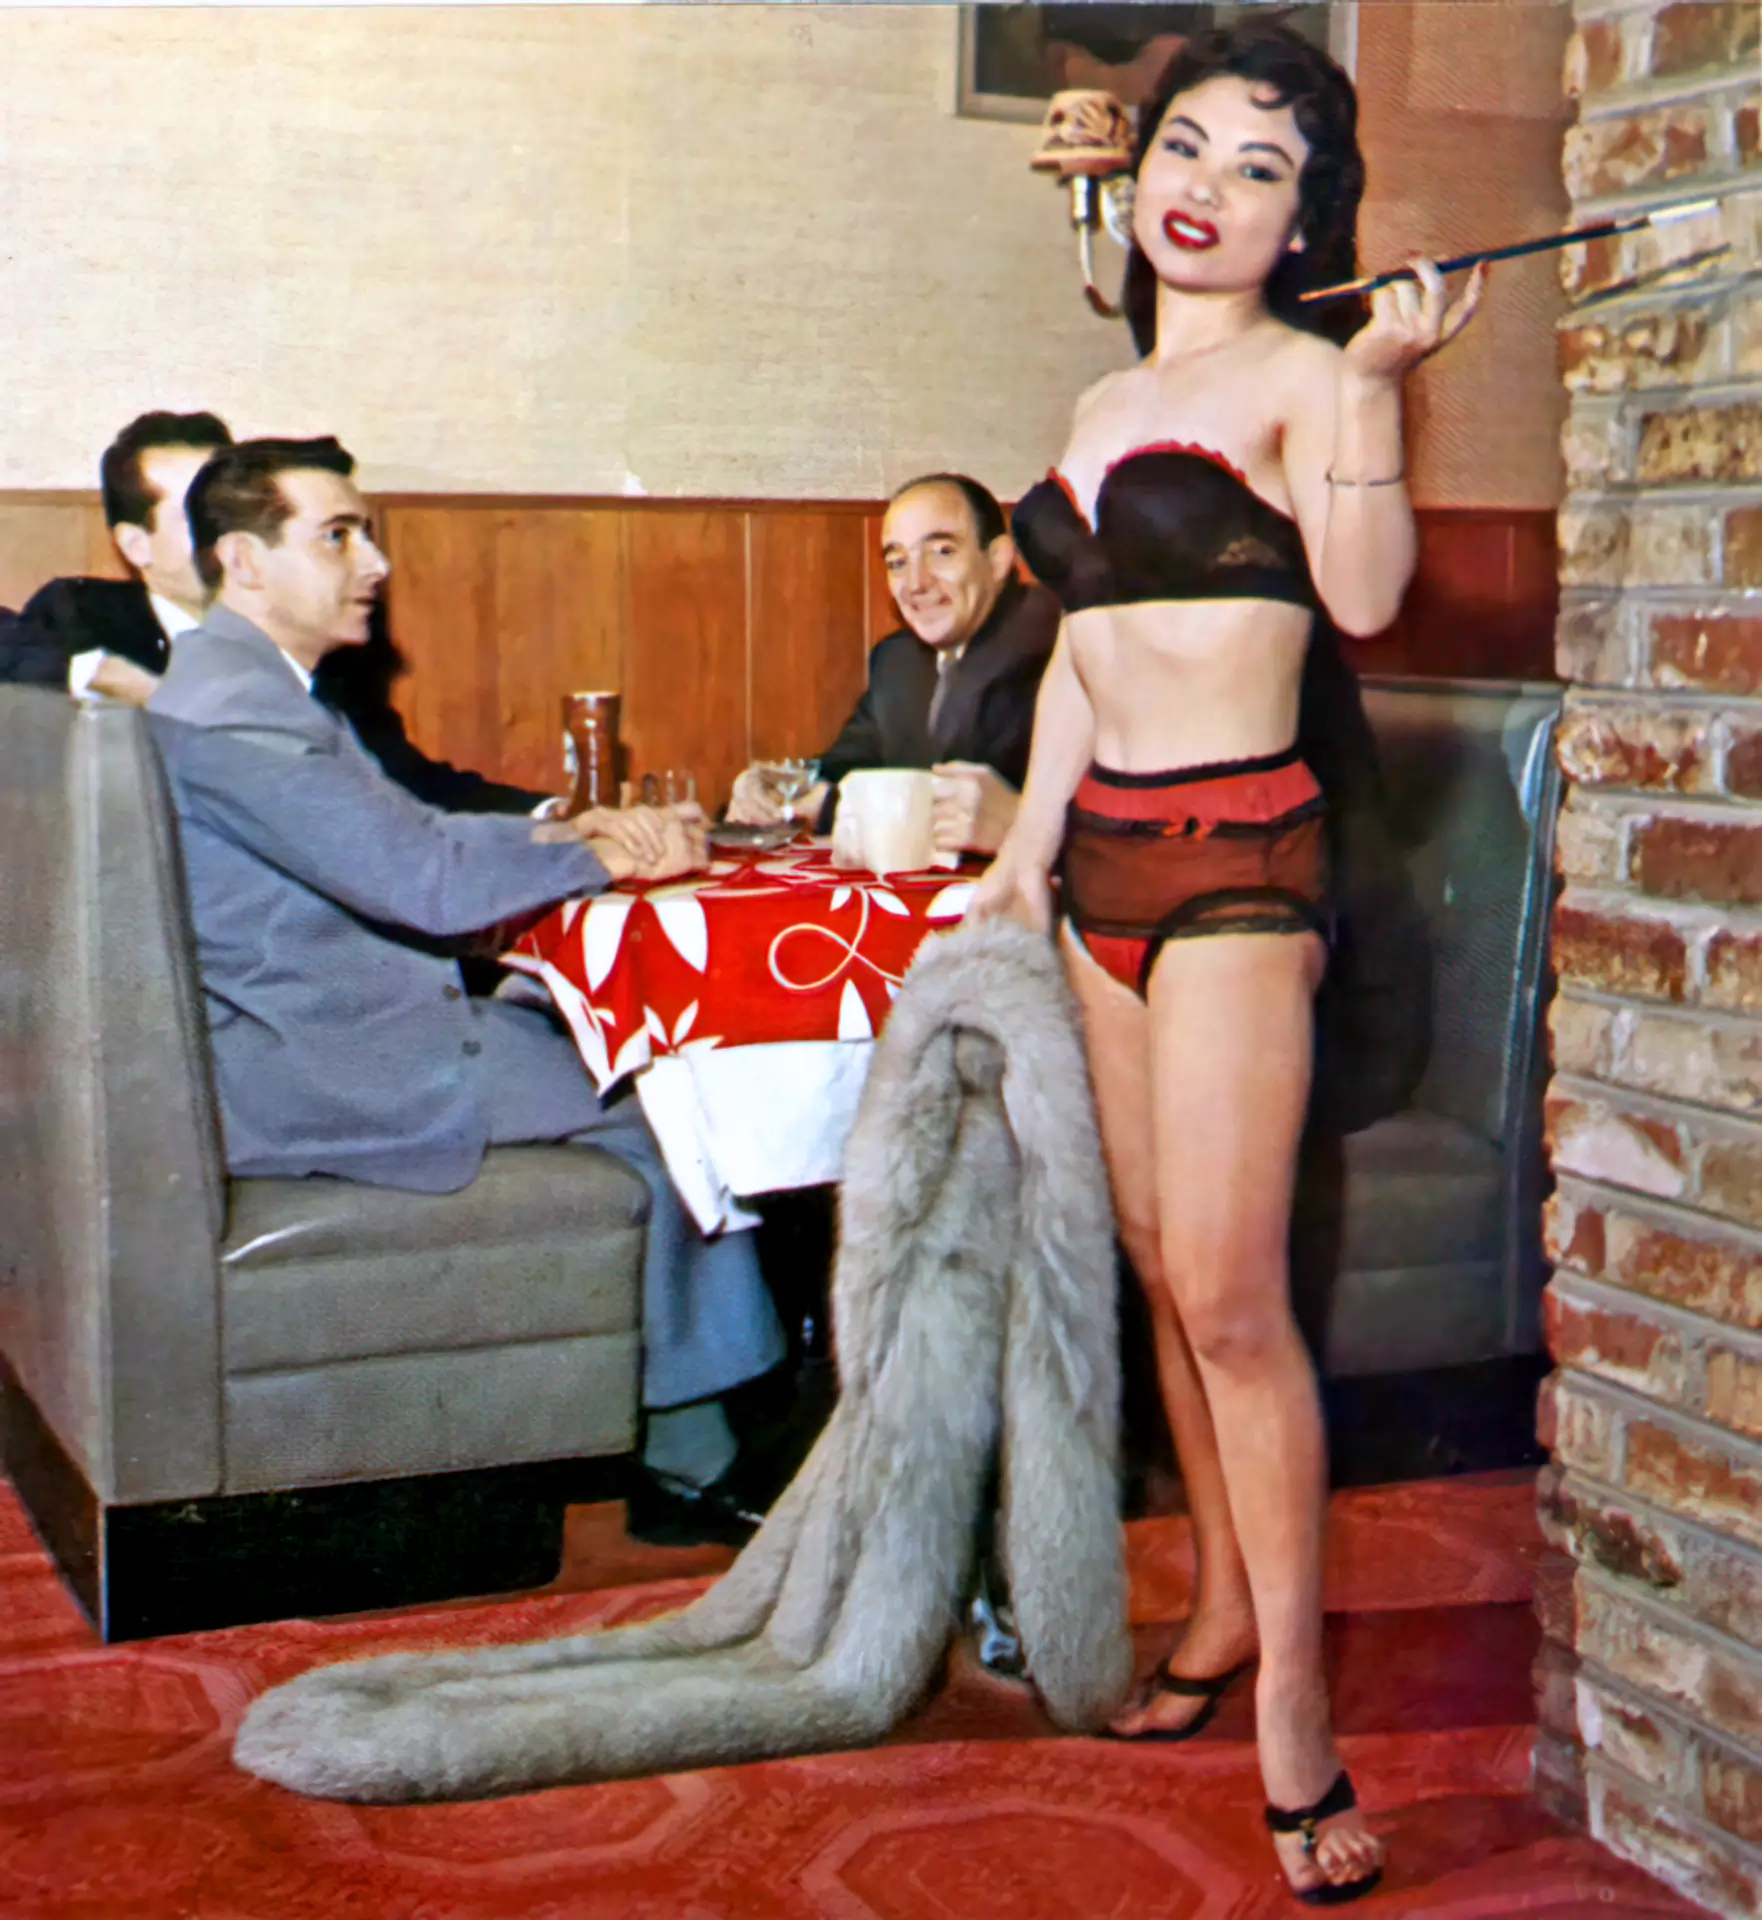 Burlesque brunette holds a long cigarette in a company of gentlemen